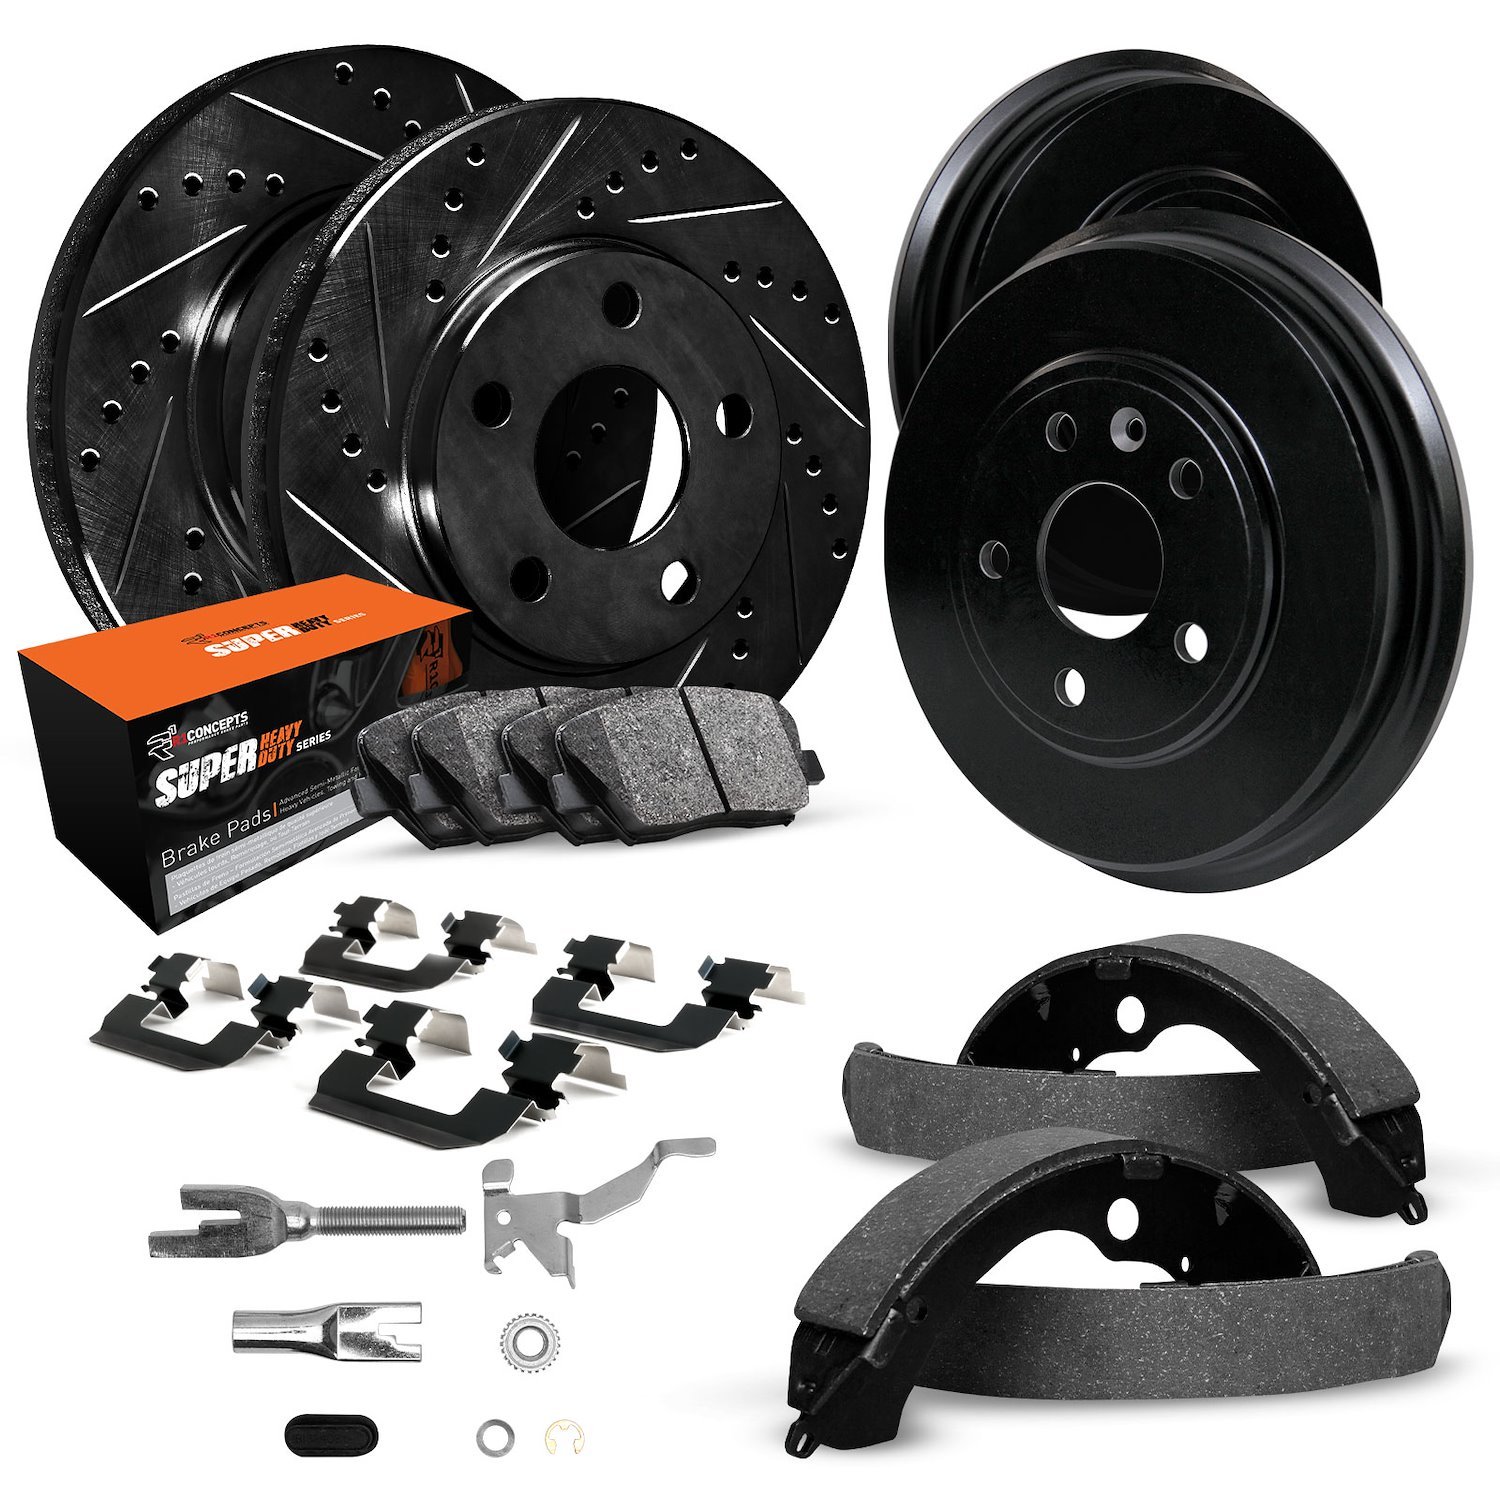 E-Line Drilled/Slotted Black Rotor & Drum Set w/Super-Duty Pads, Shoes, Hardware/Adjusters, 1993-1999 GM